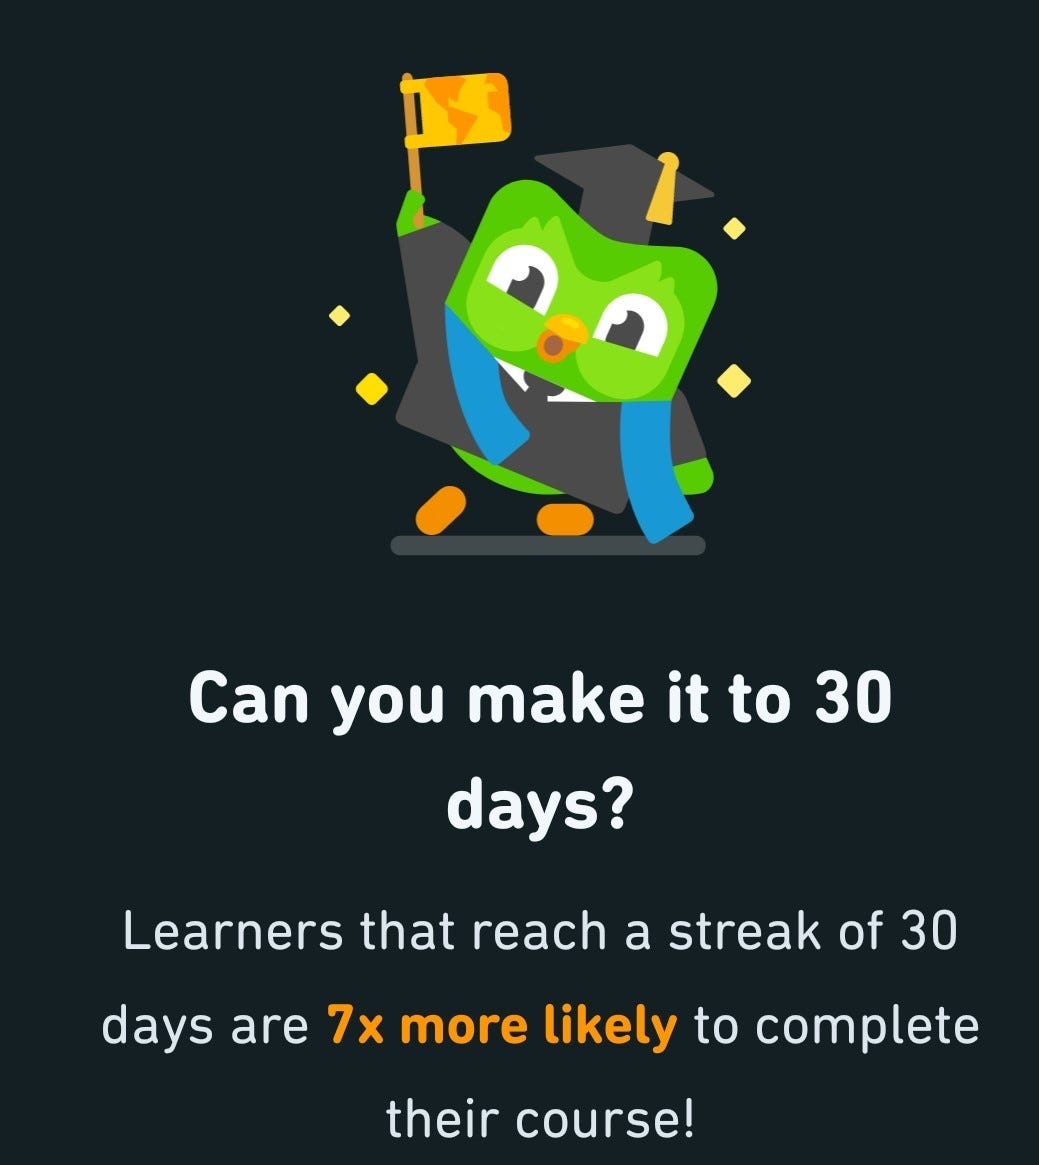 Can you make it to 30 days? Learners that reach a streak of 30 days are 7 times more likely to complete their course!